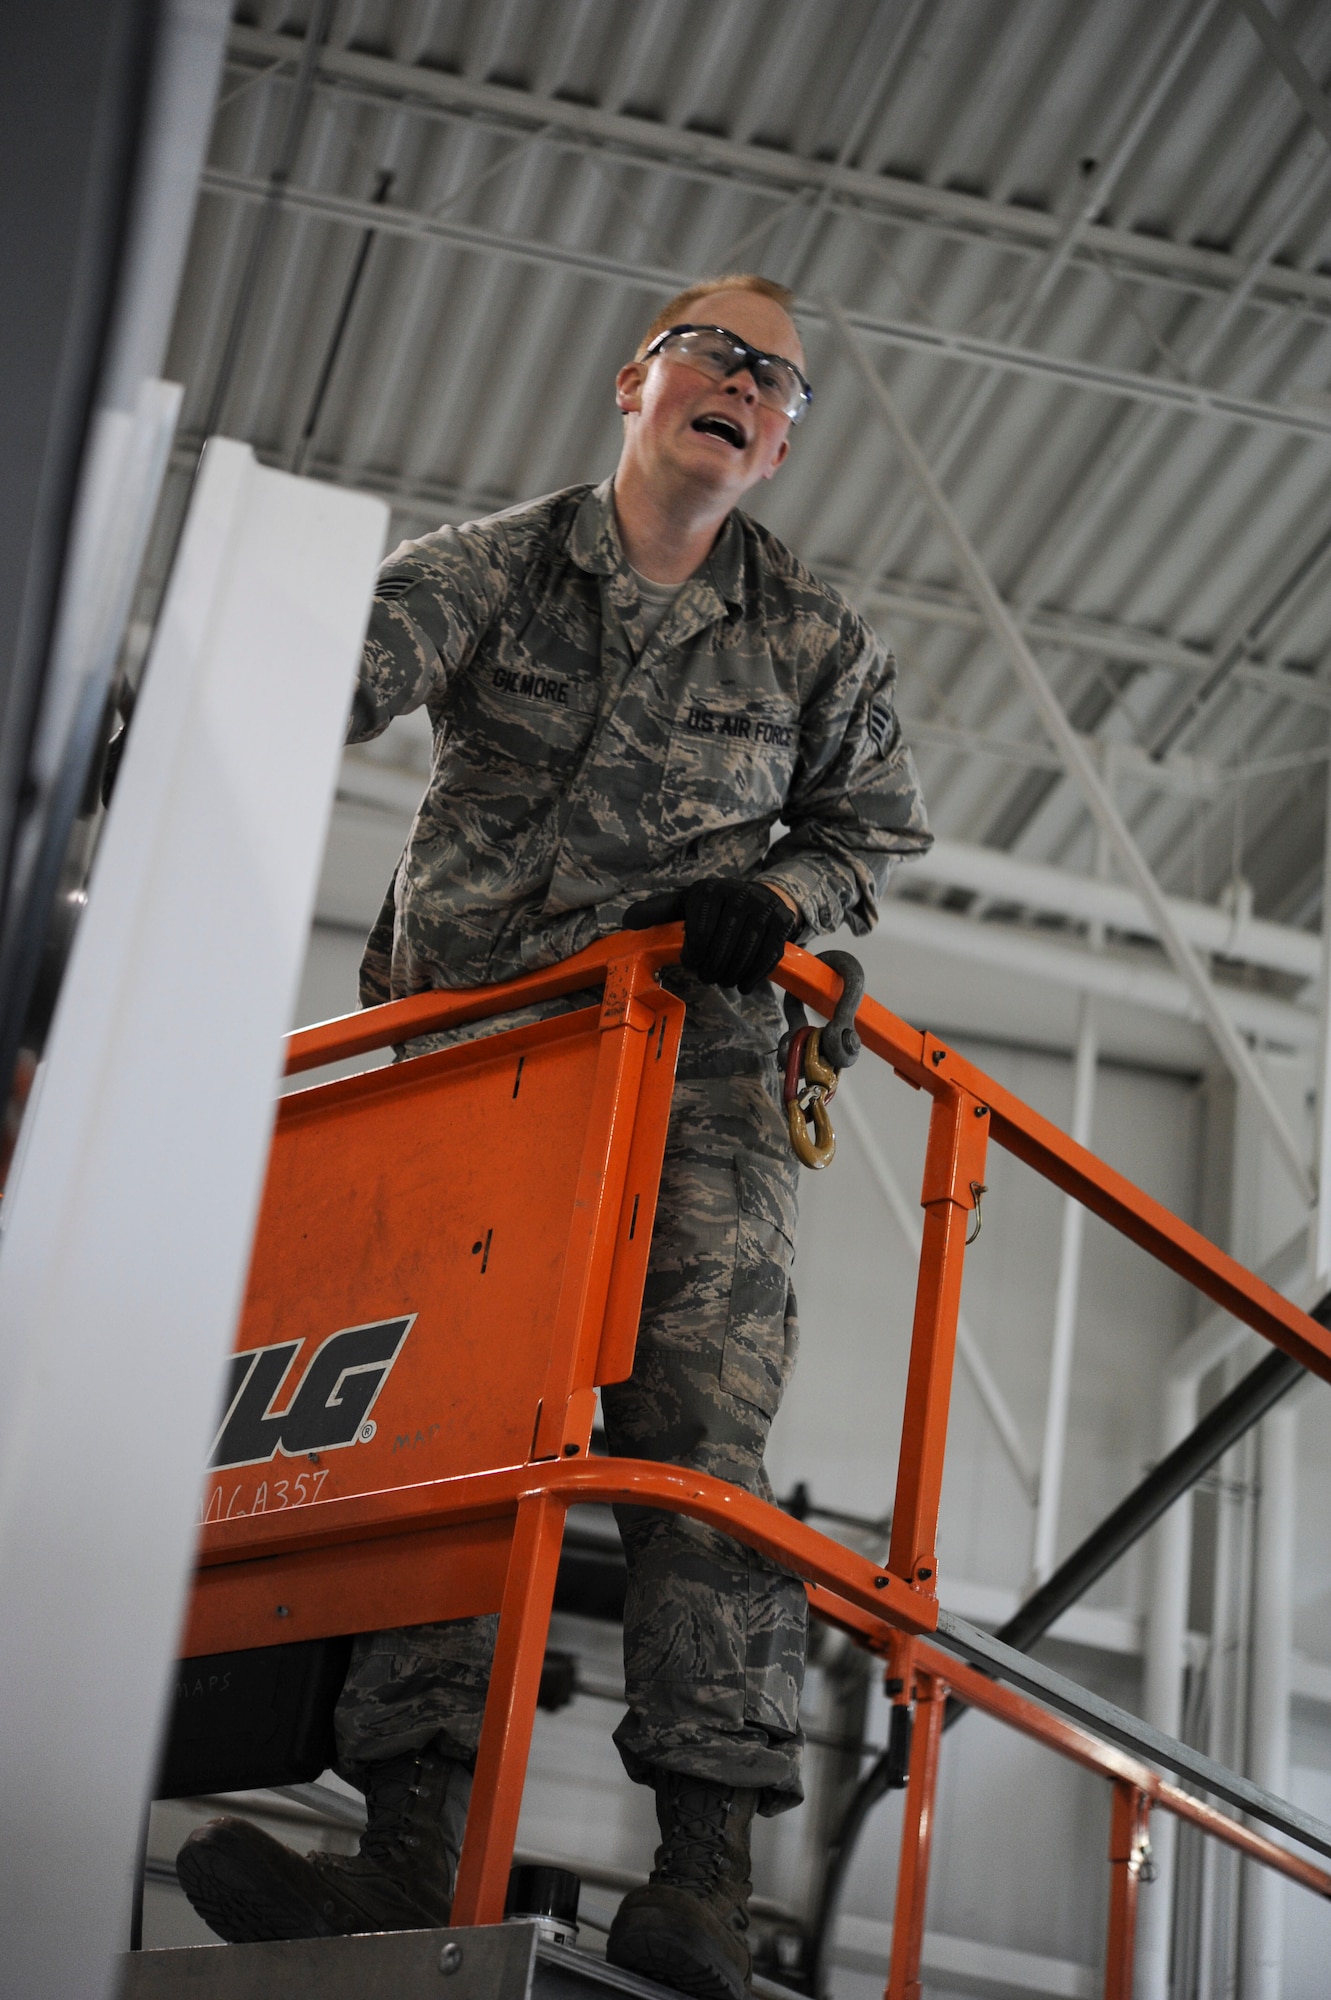 Senior Airman Brandon Gilmore, 91st Missile Operations Squadron mechanical and pneudraulics section technician, calls out instructions for his teammates from a bucket lift during maintenance on a crane on Minot Air Force Base, N.D. Oct. 30, 2014. Gilmore worked with a team of other MAPS Airmen to replace the cranes main cable. (U.S. Air Force photo/Senior Airman Stephanie Morris)